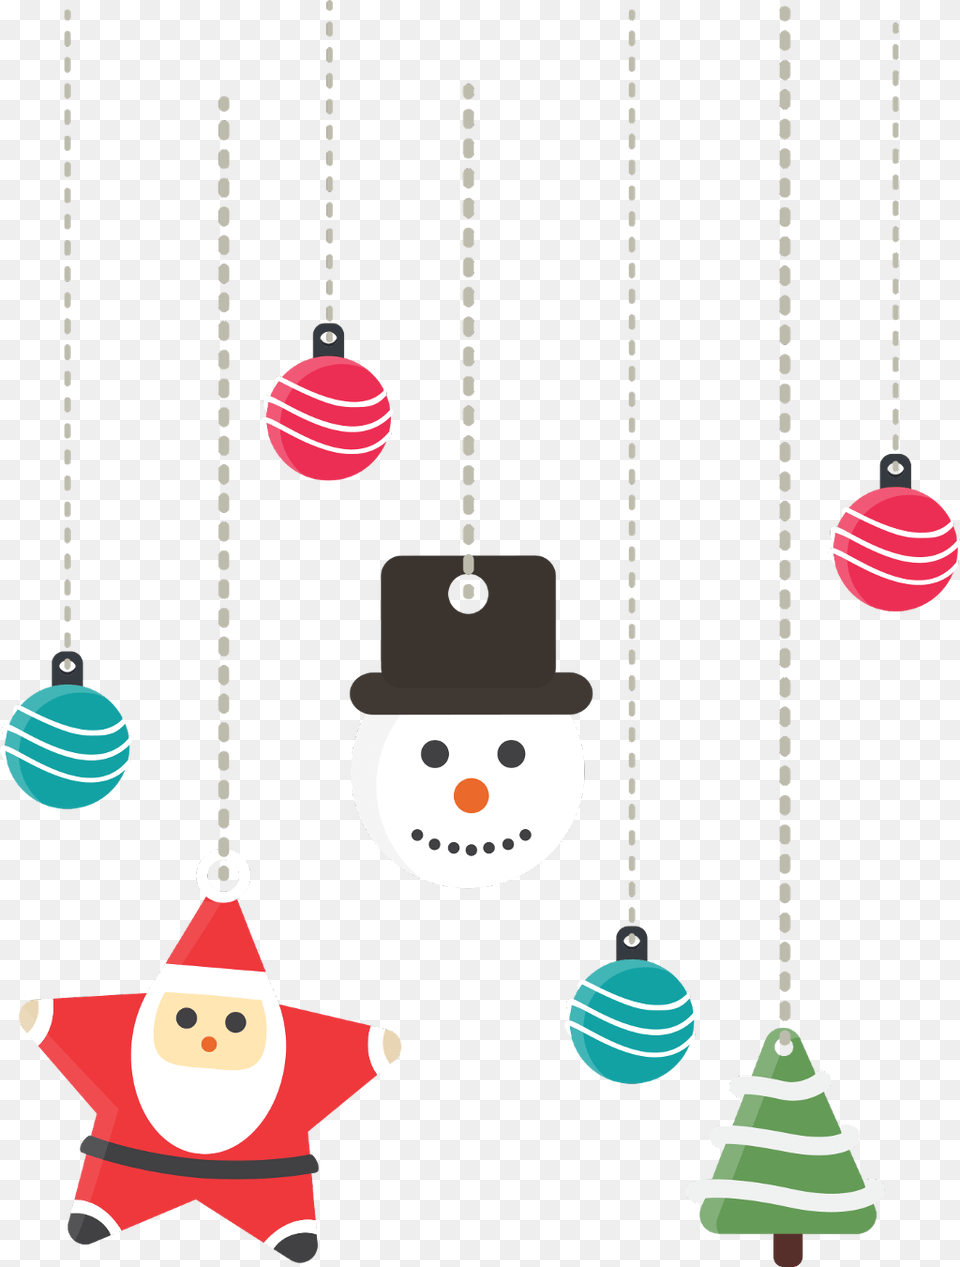 Cute Colorful Snowman Merrychristmas Christmas Transparent Background Christmas Decorations Snowman, Accessories, Jewelry, Necklace, Earring Free Png Download